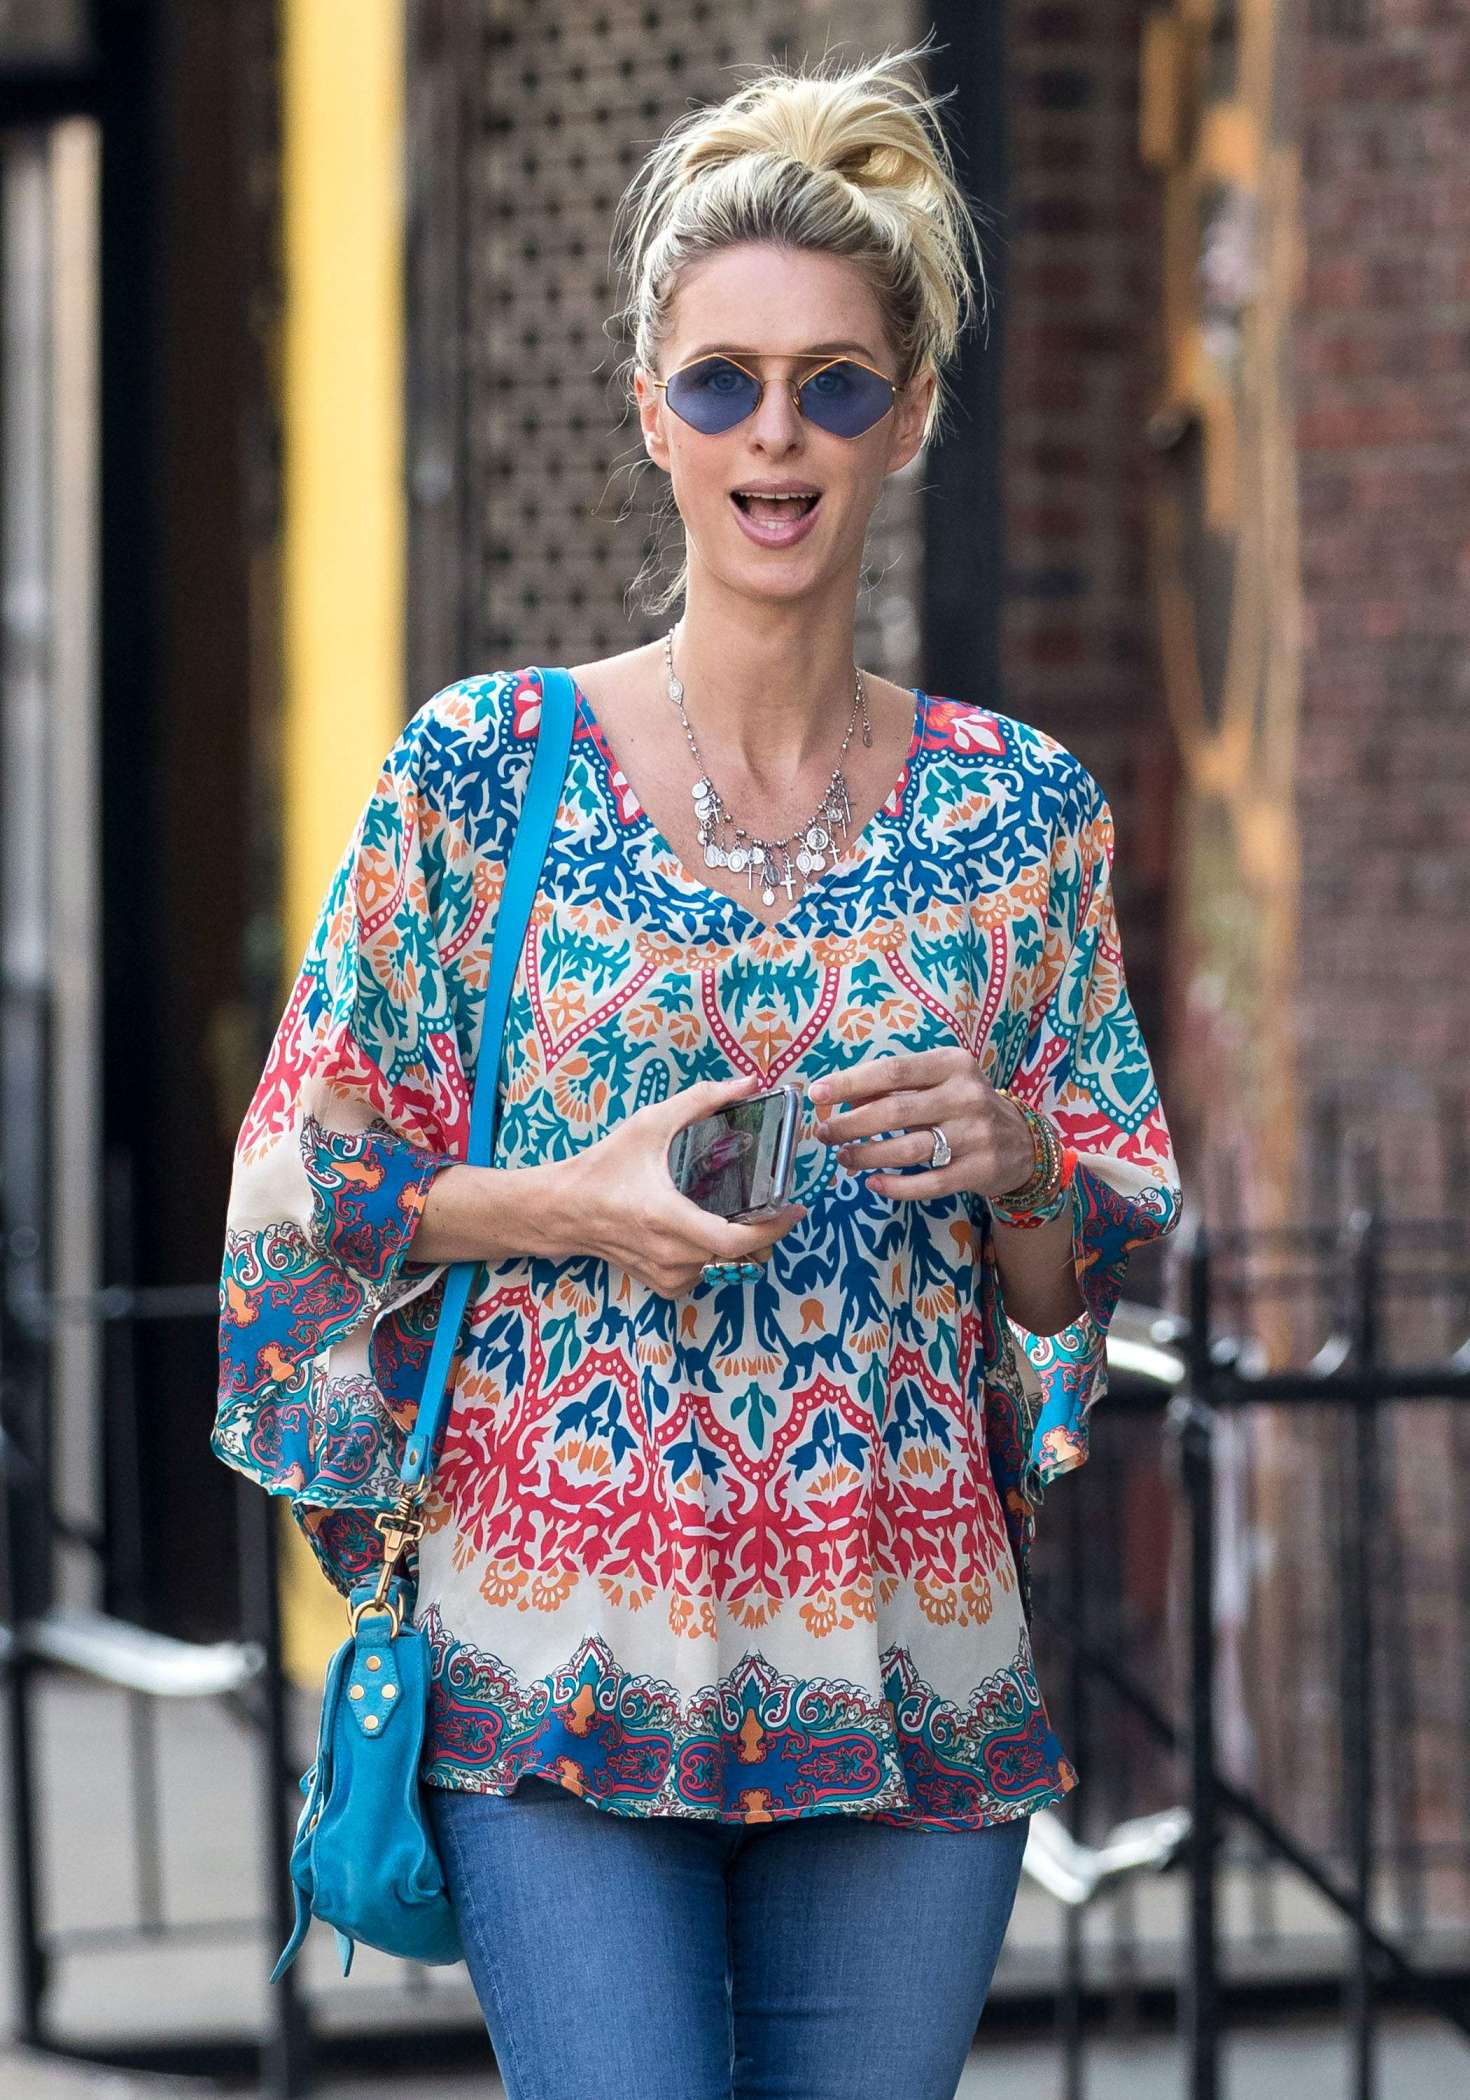 Nicky Hilton in Jeans Out in New York City